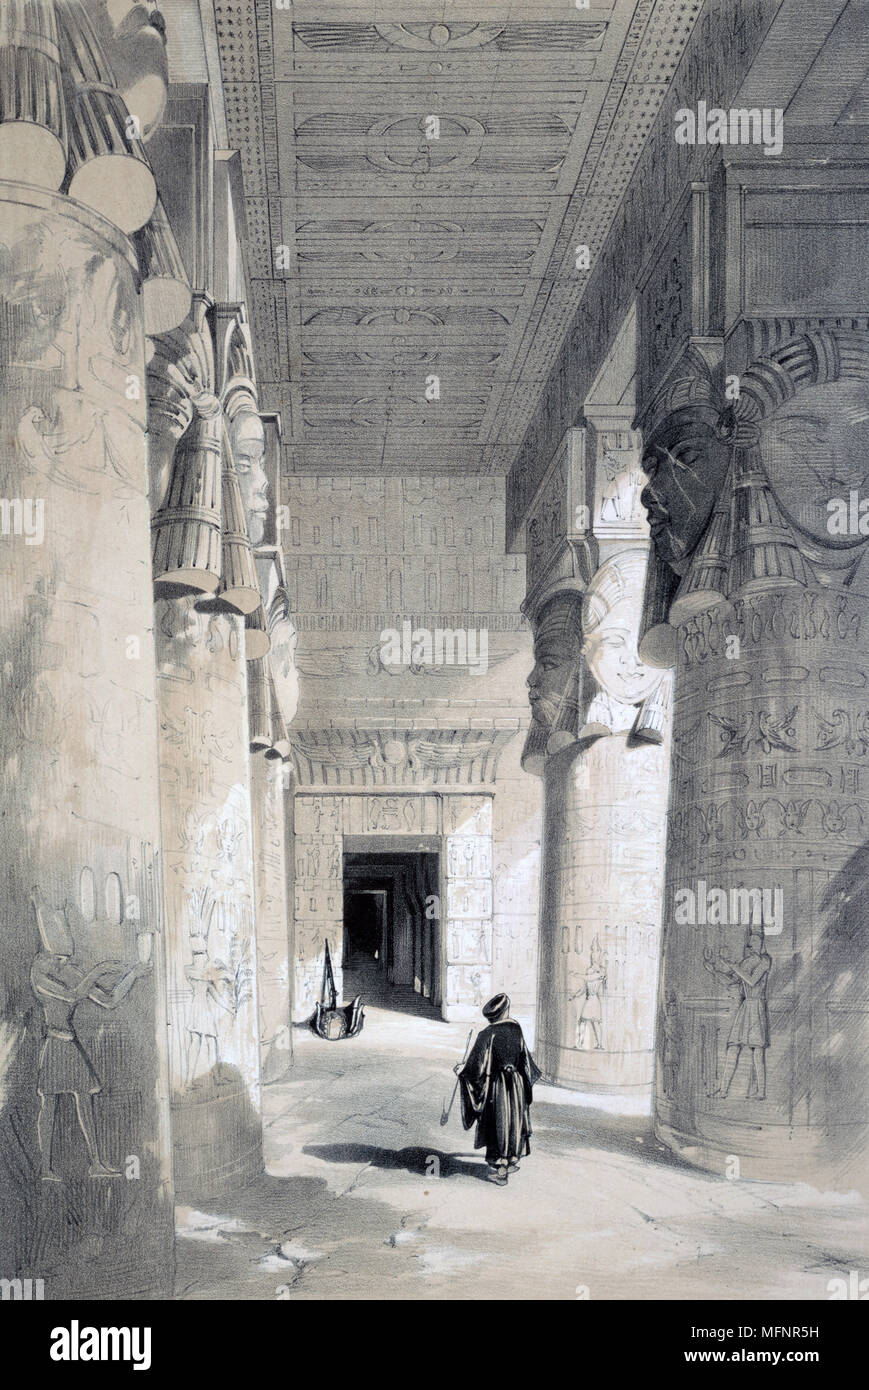 Temple of Dendera', 1845. Lithograph after Henry Pilleau (1813-1899) English artist. Hippostyle hall of the Temple of Hathor, mother goddes of Ancient Egypt. Archaeology Architecture Religion Mythology Stock Photo